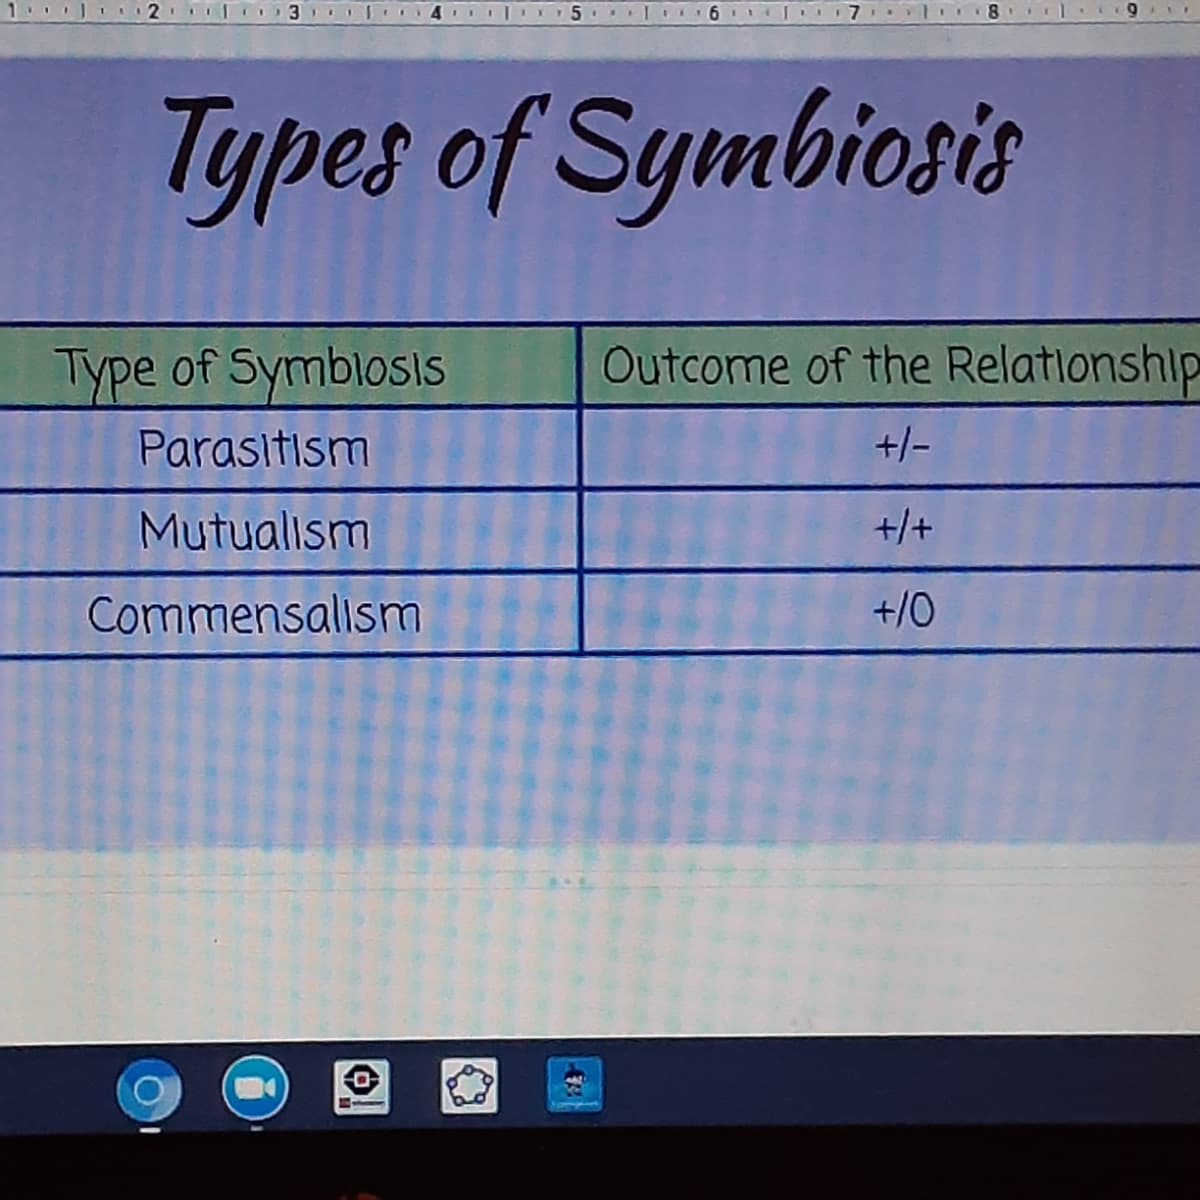 115
Types of Symbiosis
Type of Symblosis
Outcome of the Relationship
Parasitism
+/-
Mutualism
+/+
Commensalism
+/0
